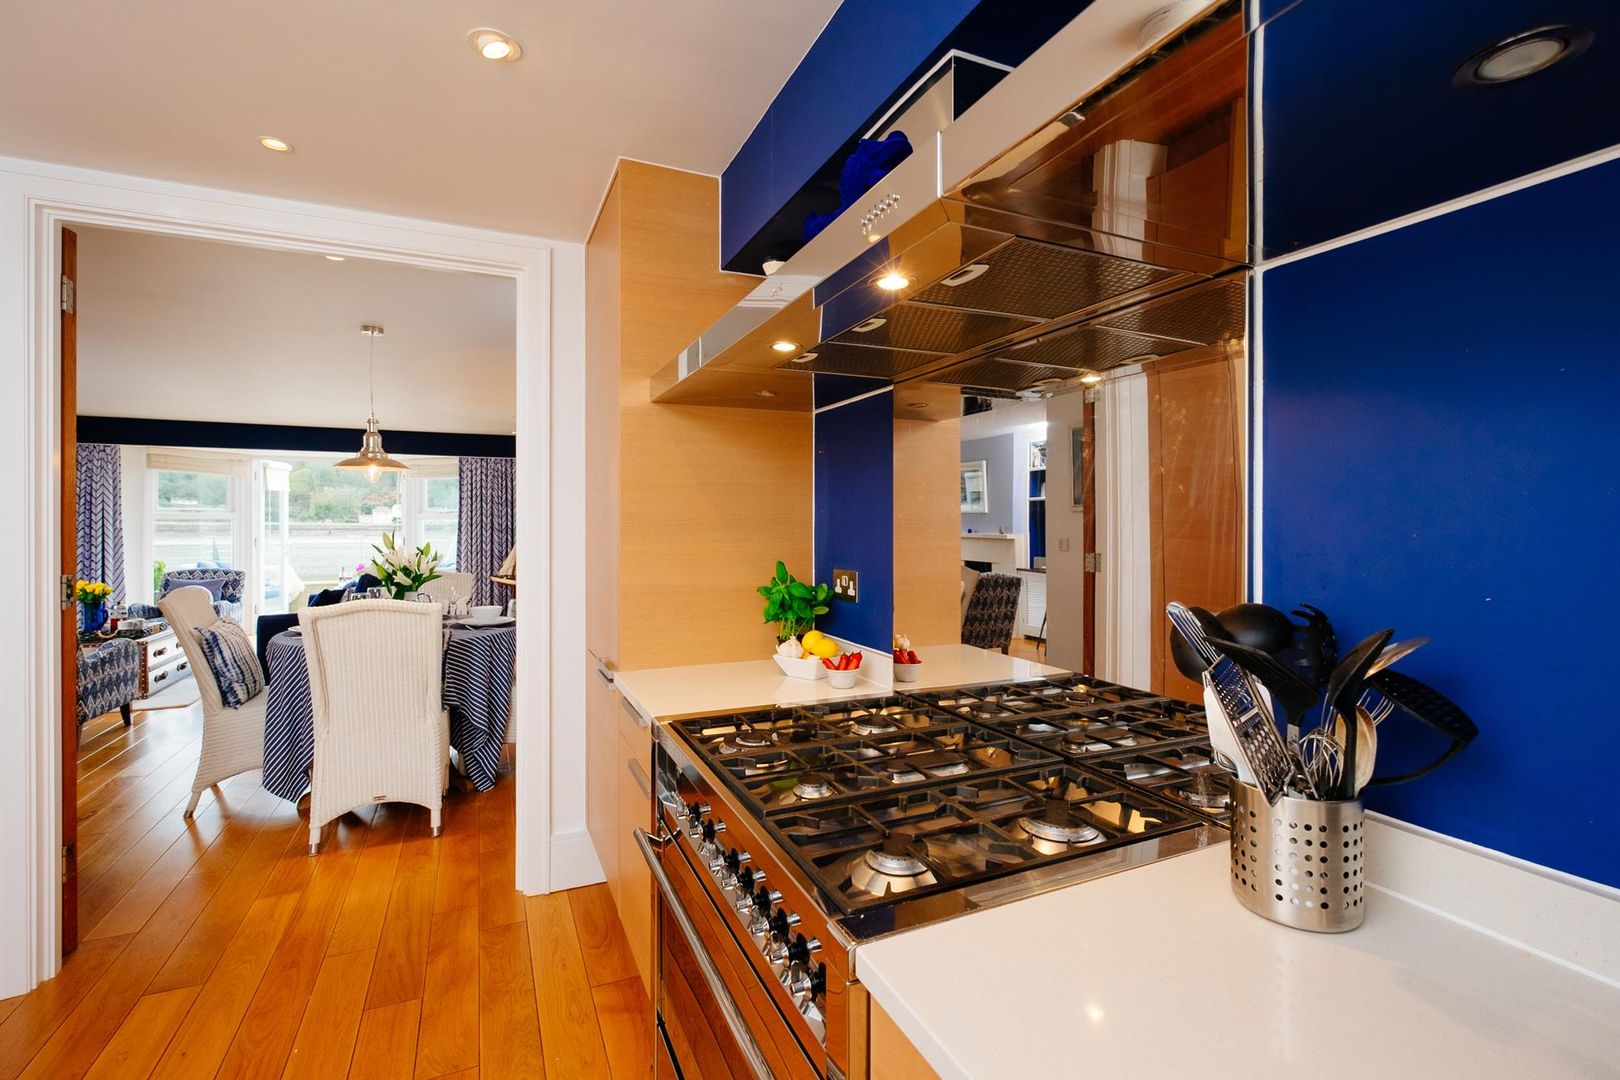 homify Eclectic style kitchen kitchen,blue,wooden floor,holiday home,interior